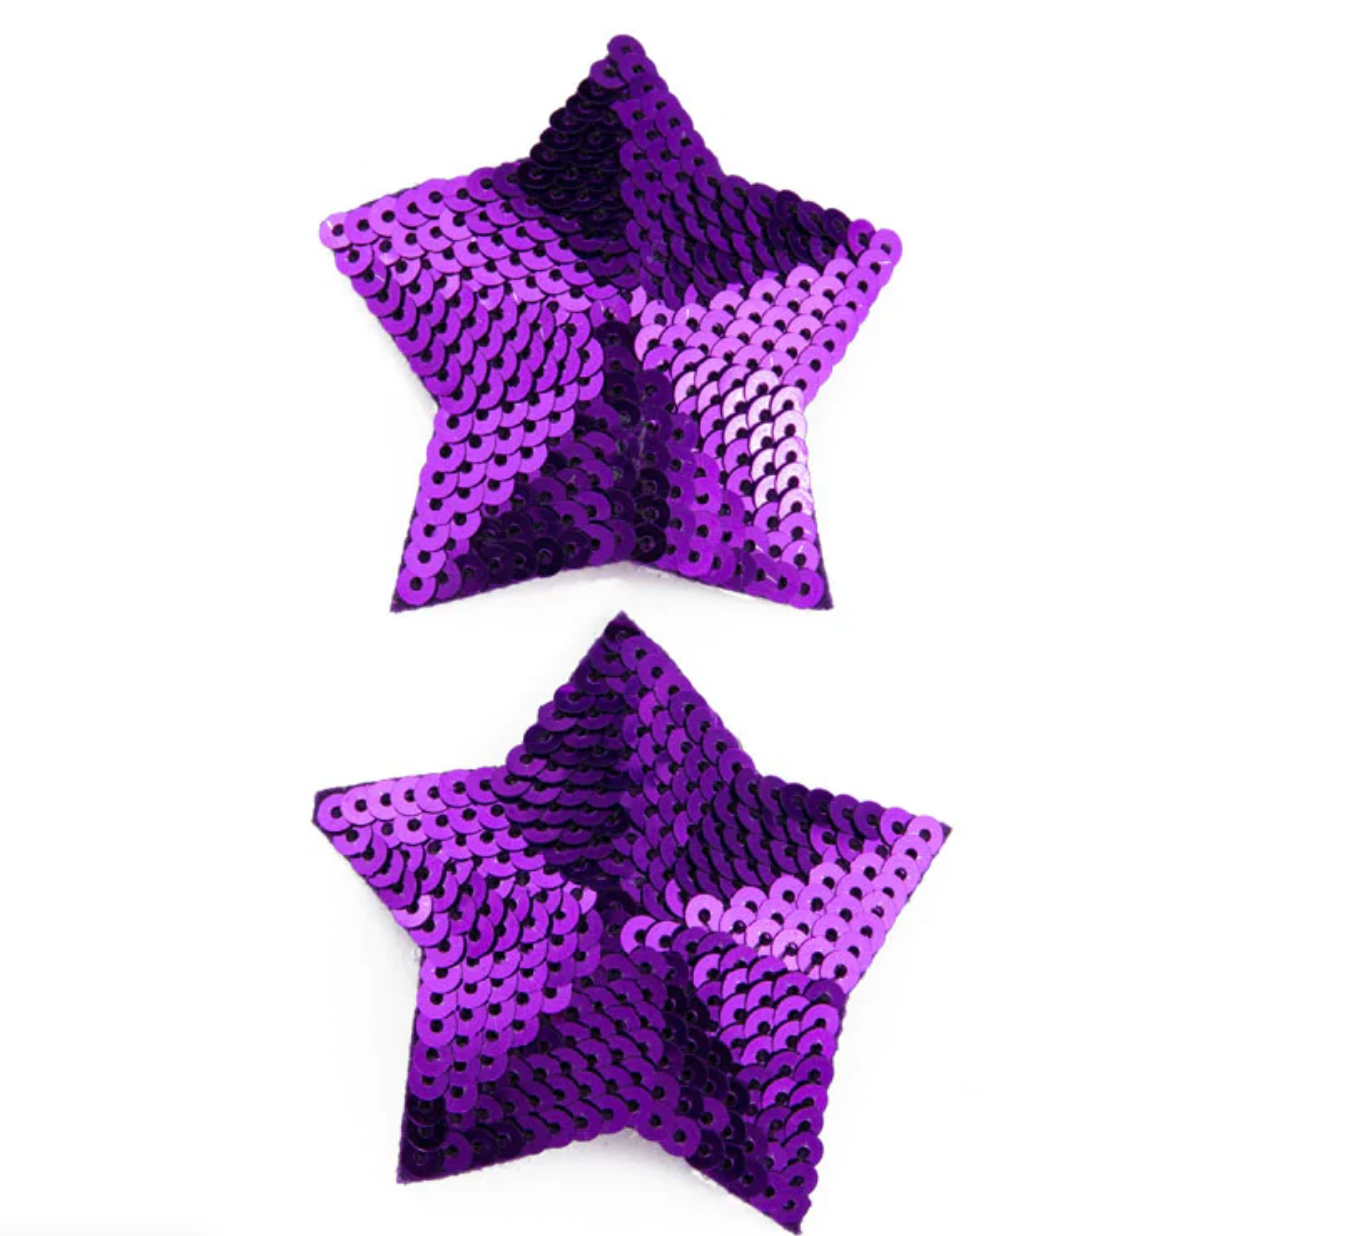 STARLIGHT BUNDLE 2 Pairs of Star Nipple Pasties, Cover (4pcs) for Burlesque, Lingerie Raves and Festivals – SALE